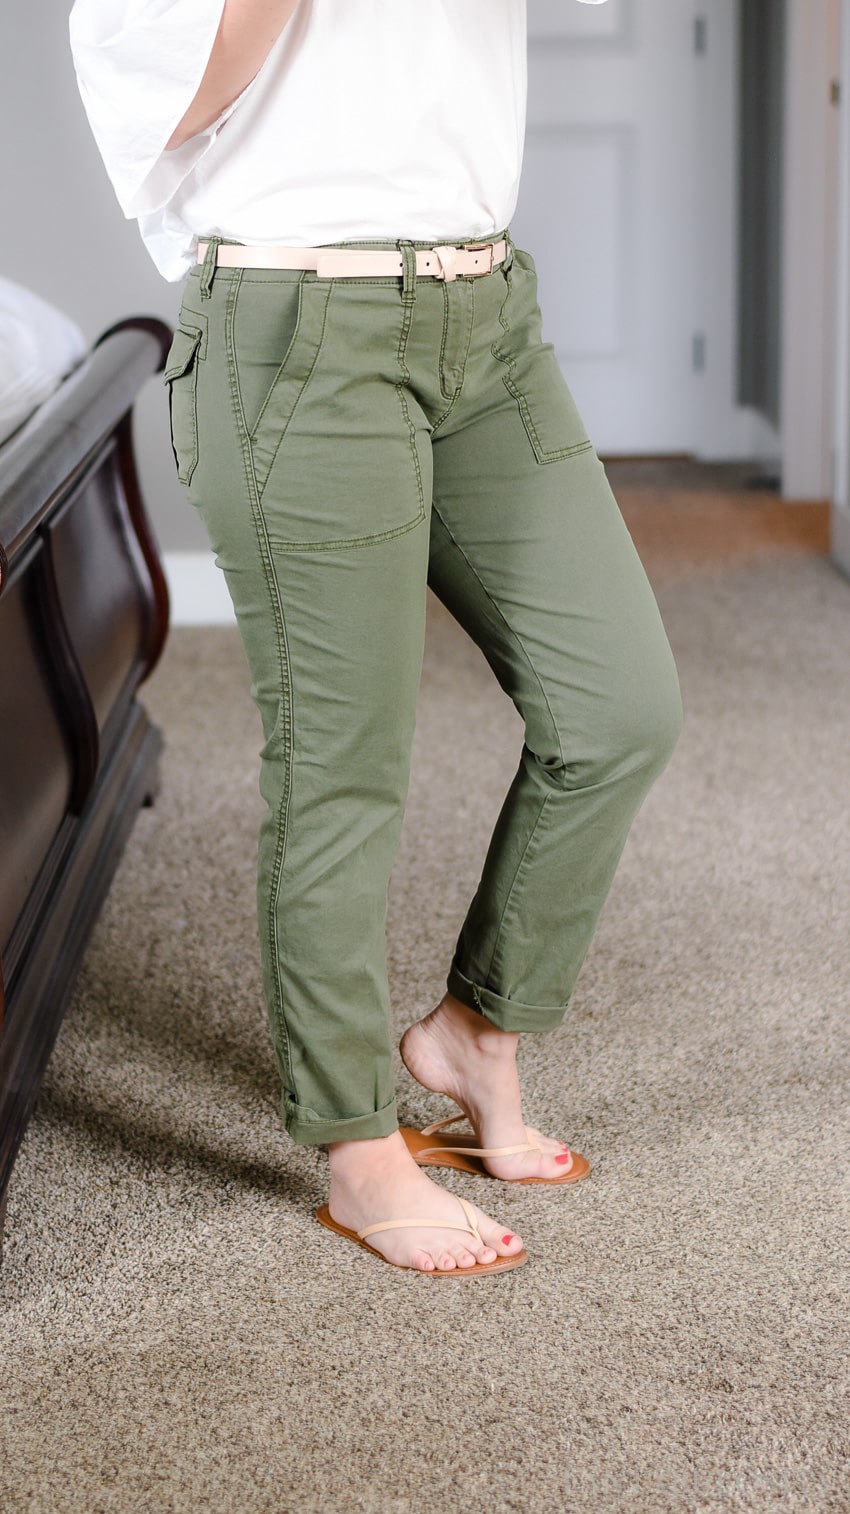 Green pants from nordstrom for summer June 2017